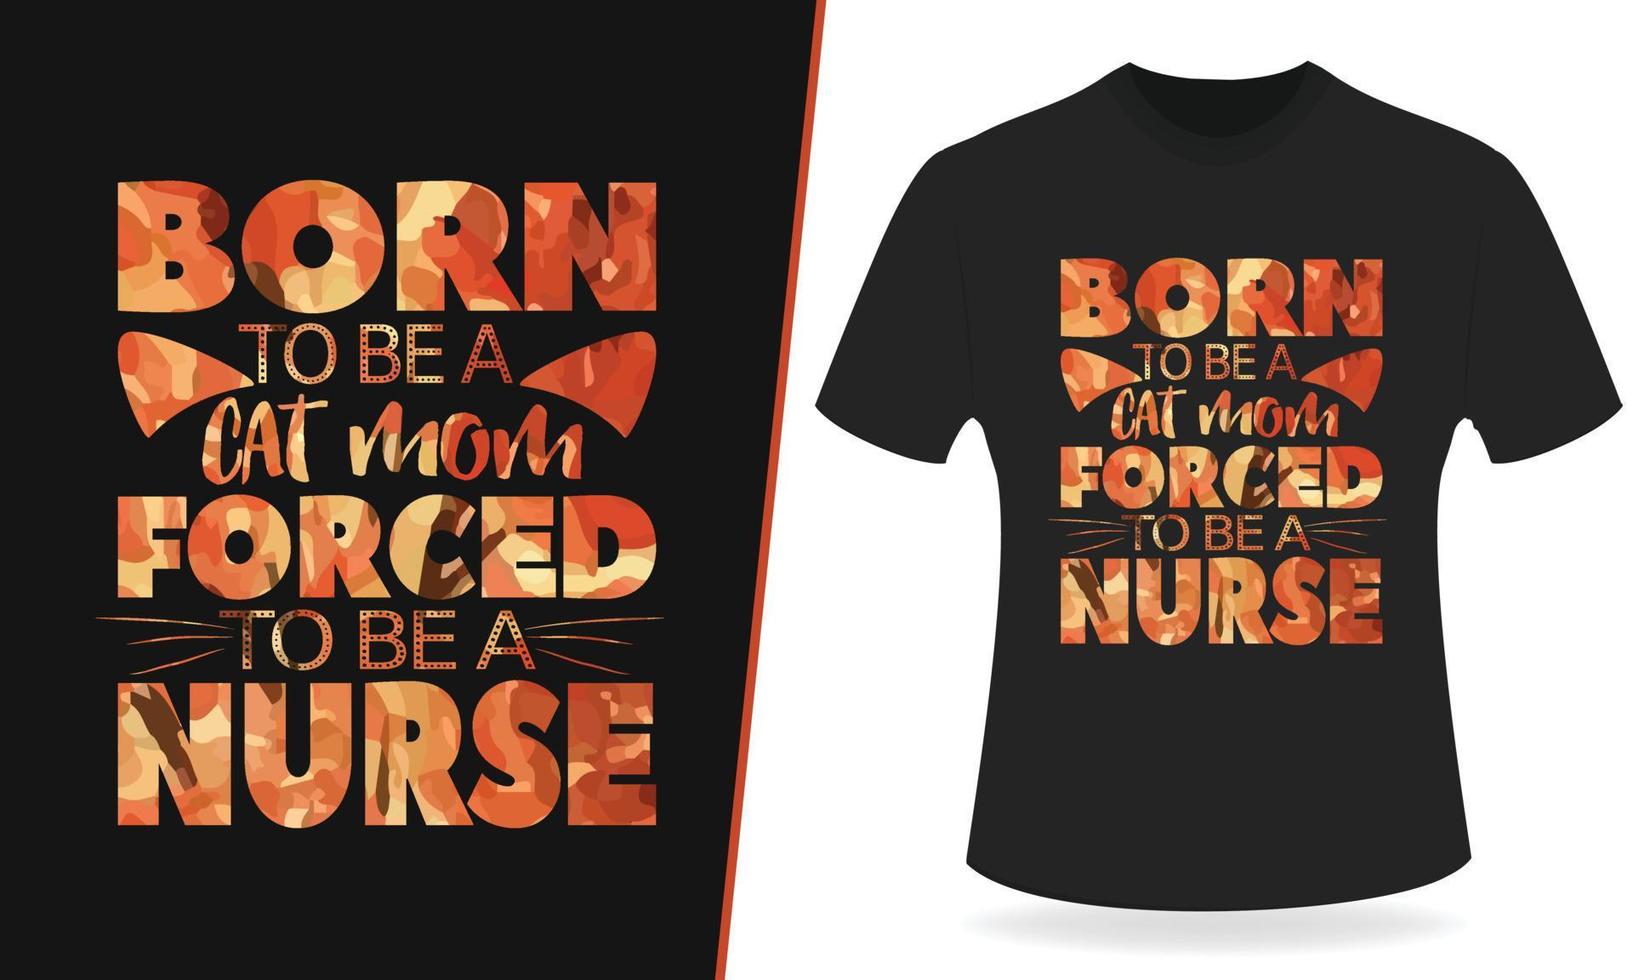 Born to be a cat mom forced to be a nurse typography t shirt design vector